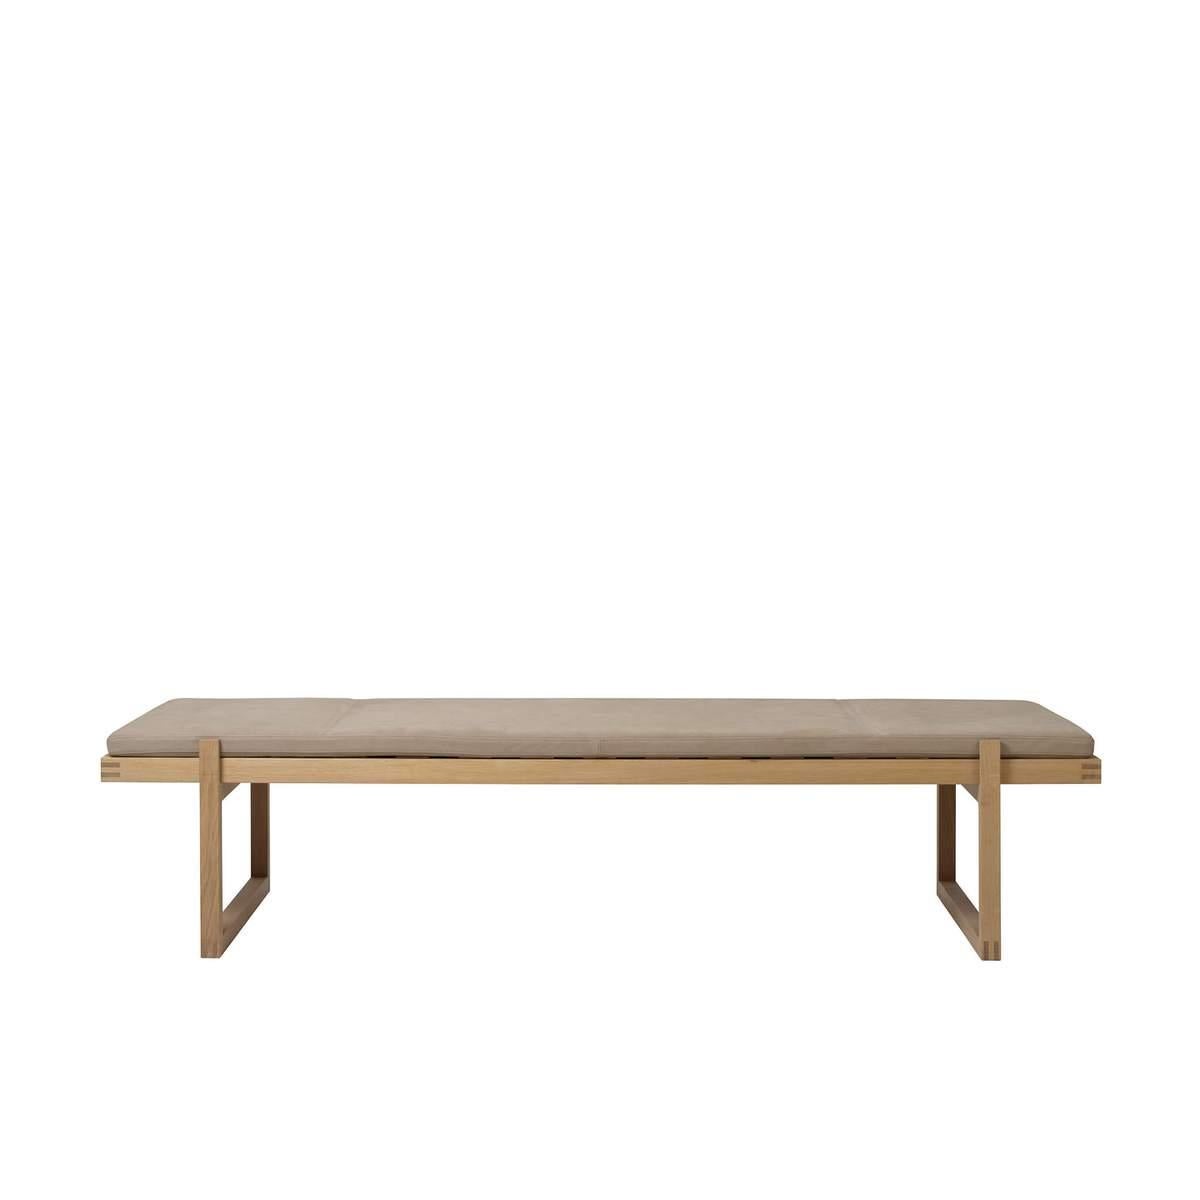 Beige Minimal daybed by Kristina Dam Studio.
Materials: Solid Oak with oil Treatment, Beige Linen. 
Also available in other colors.
Dimensions: 70 x 200 x h 44cm.

Minimal Daybed combines Japanese and Scandinavian minimal design in a coherent